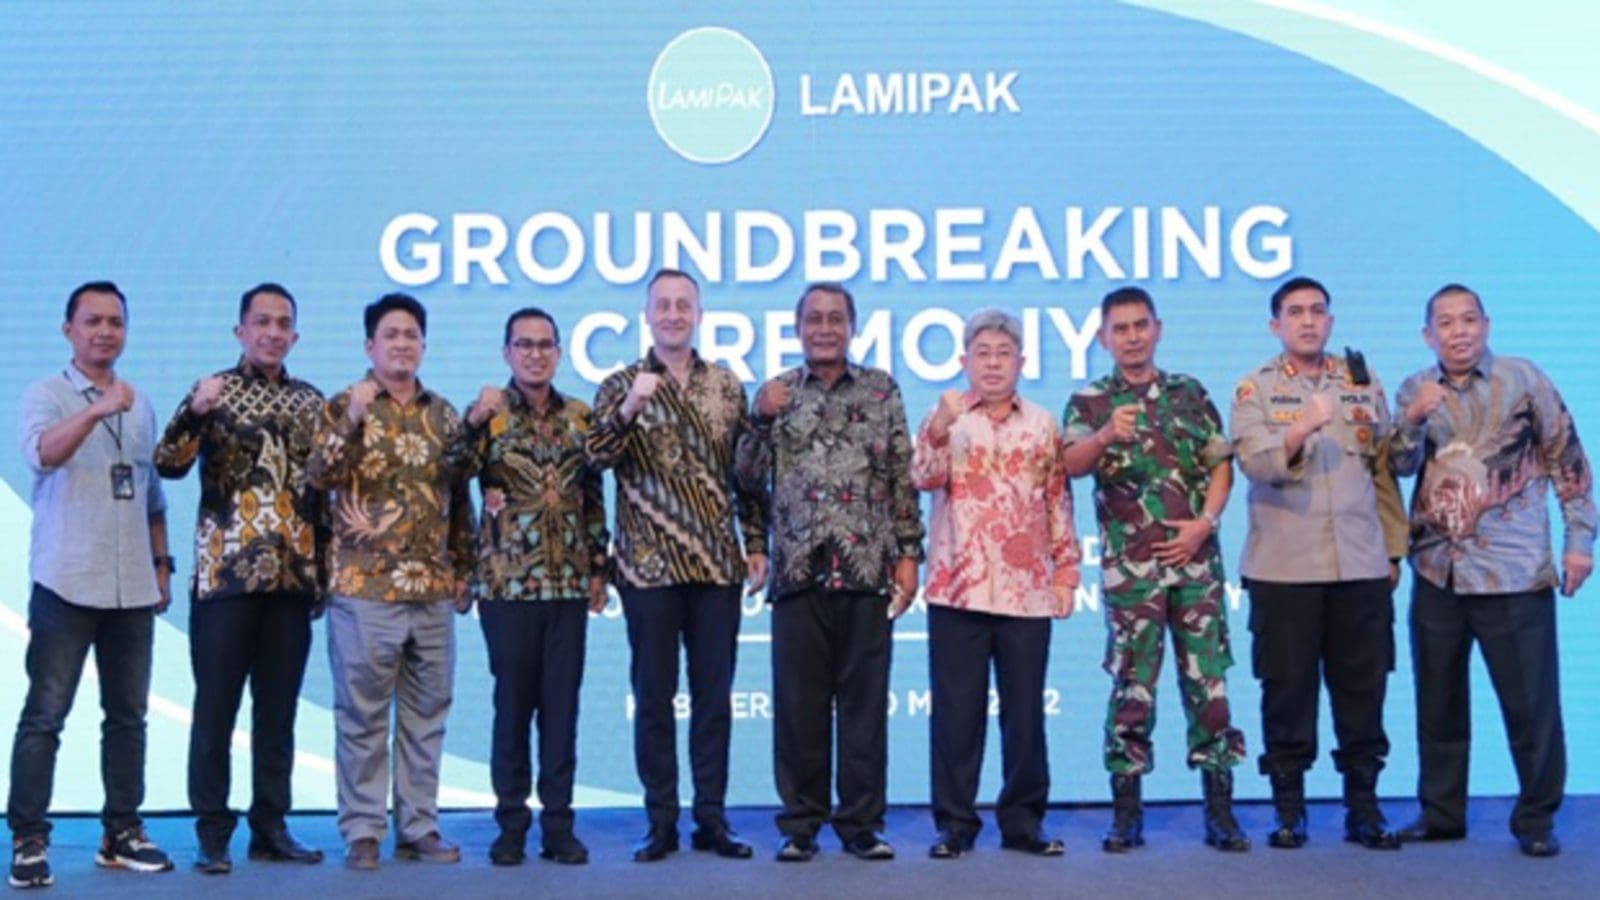 Lamipak expands presence in Indonesia with US$200m investment in new aseptic packaging facility